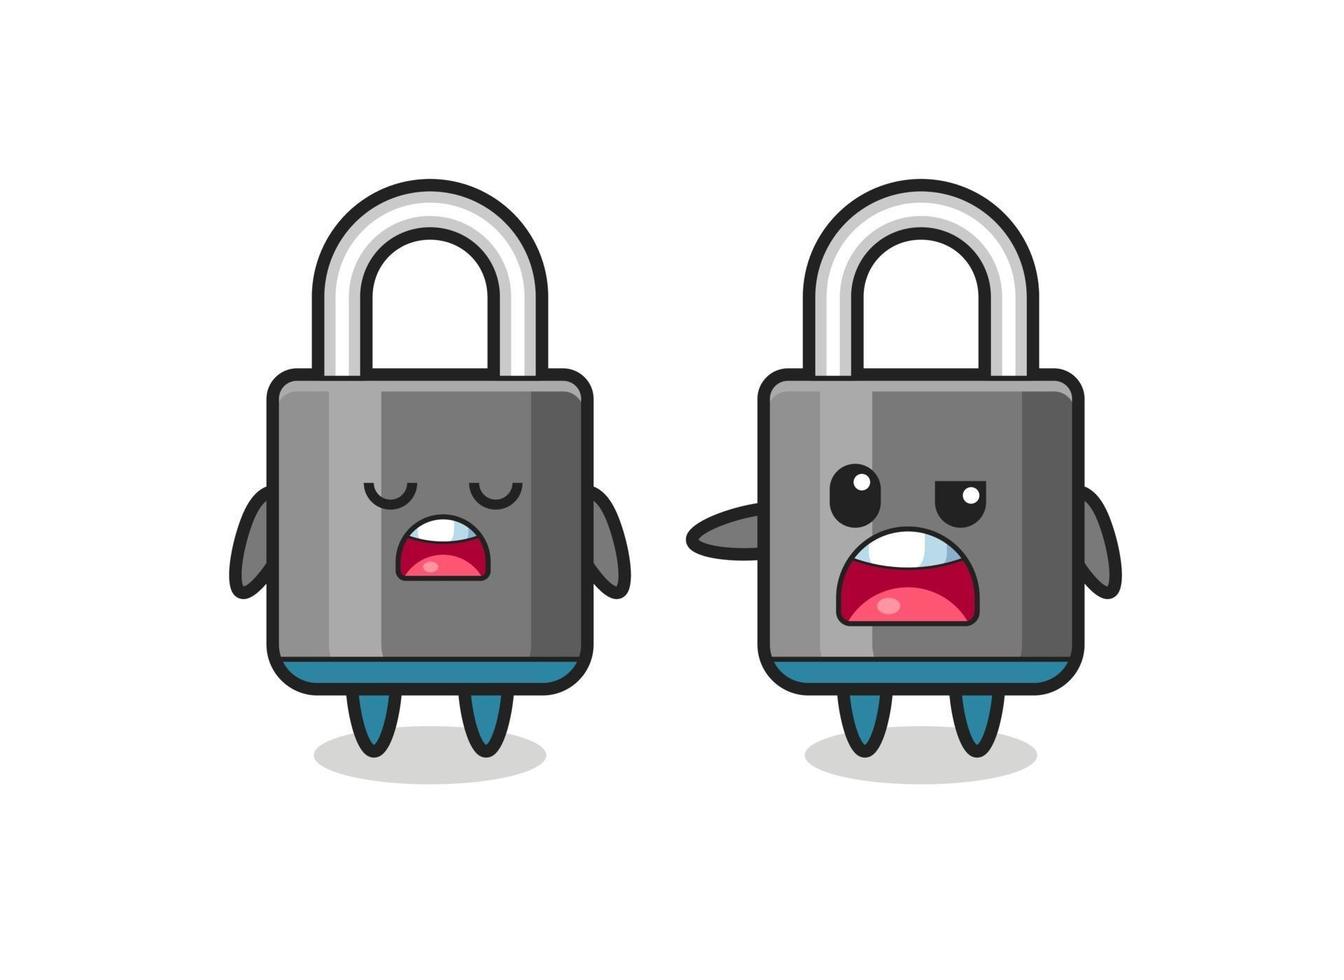 illustration of the argument between two cute padlock characters vector